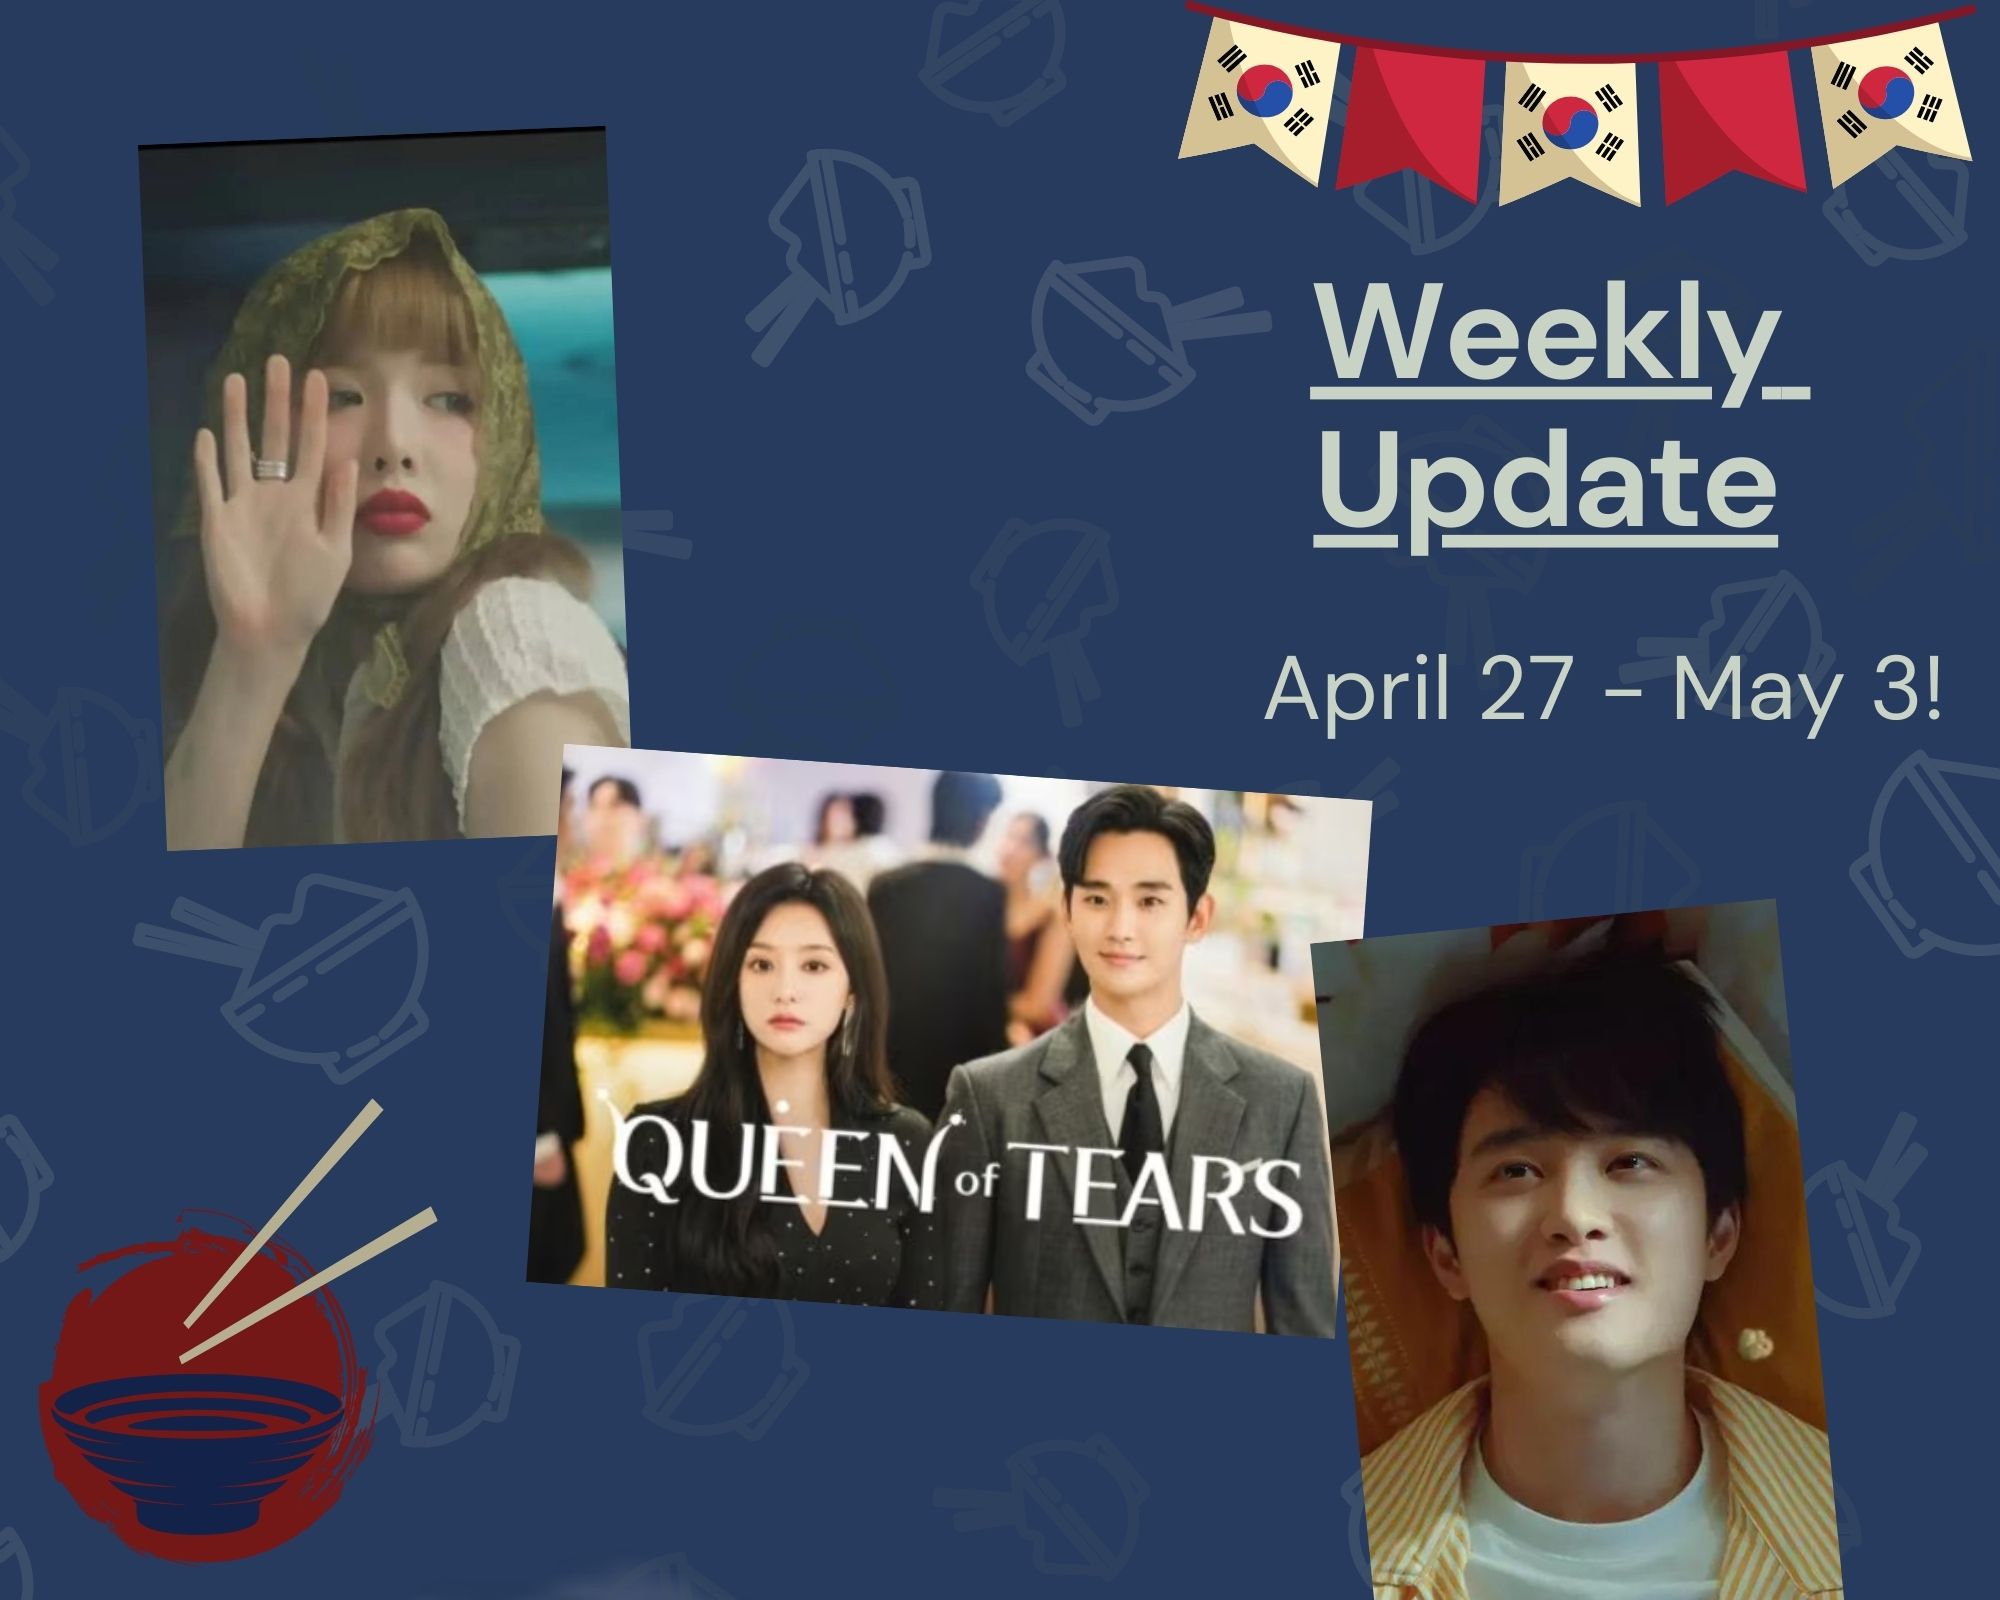 Weekly Update - April 27 - May 3